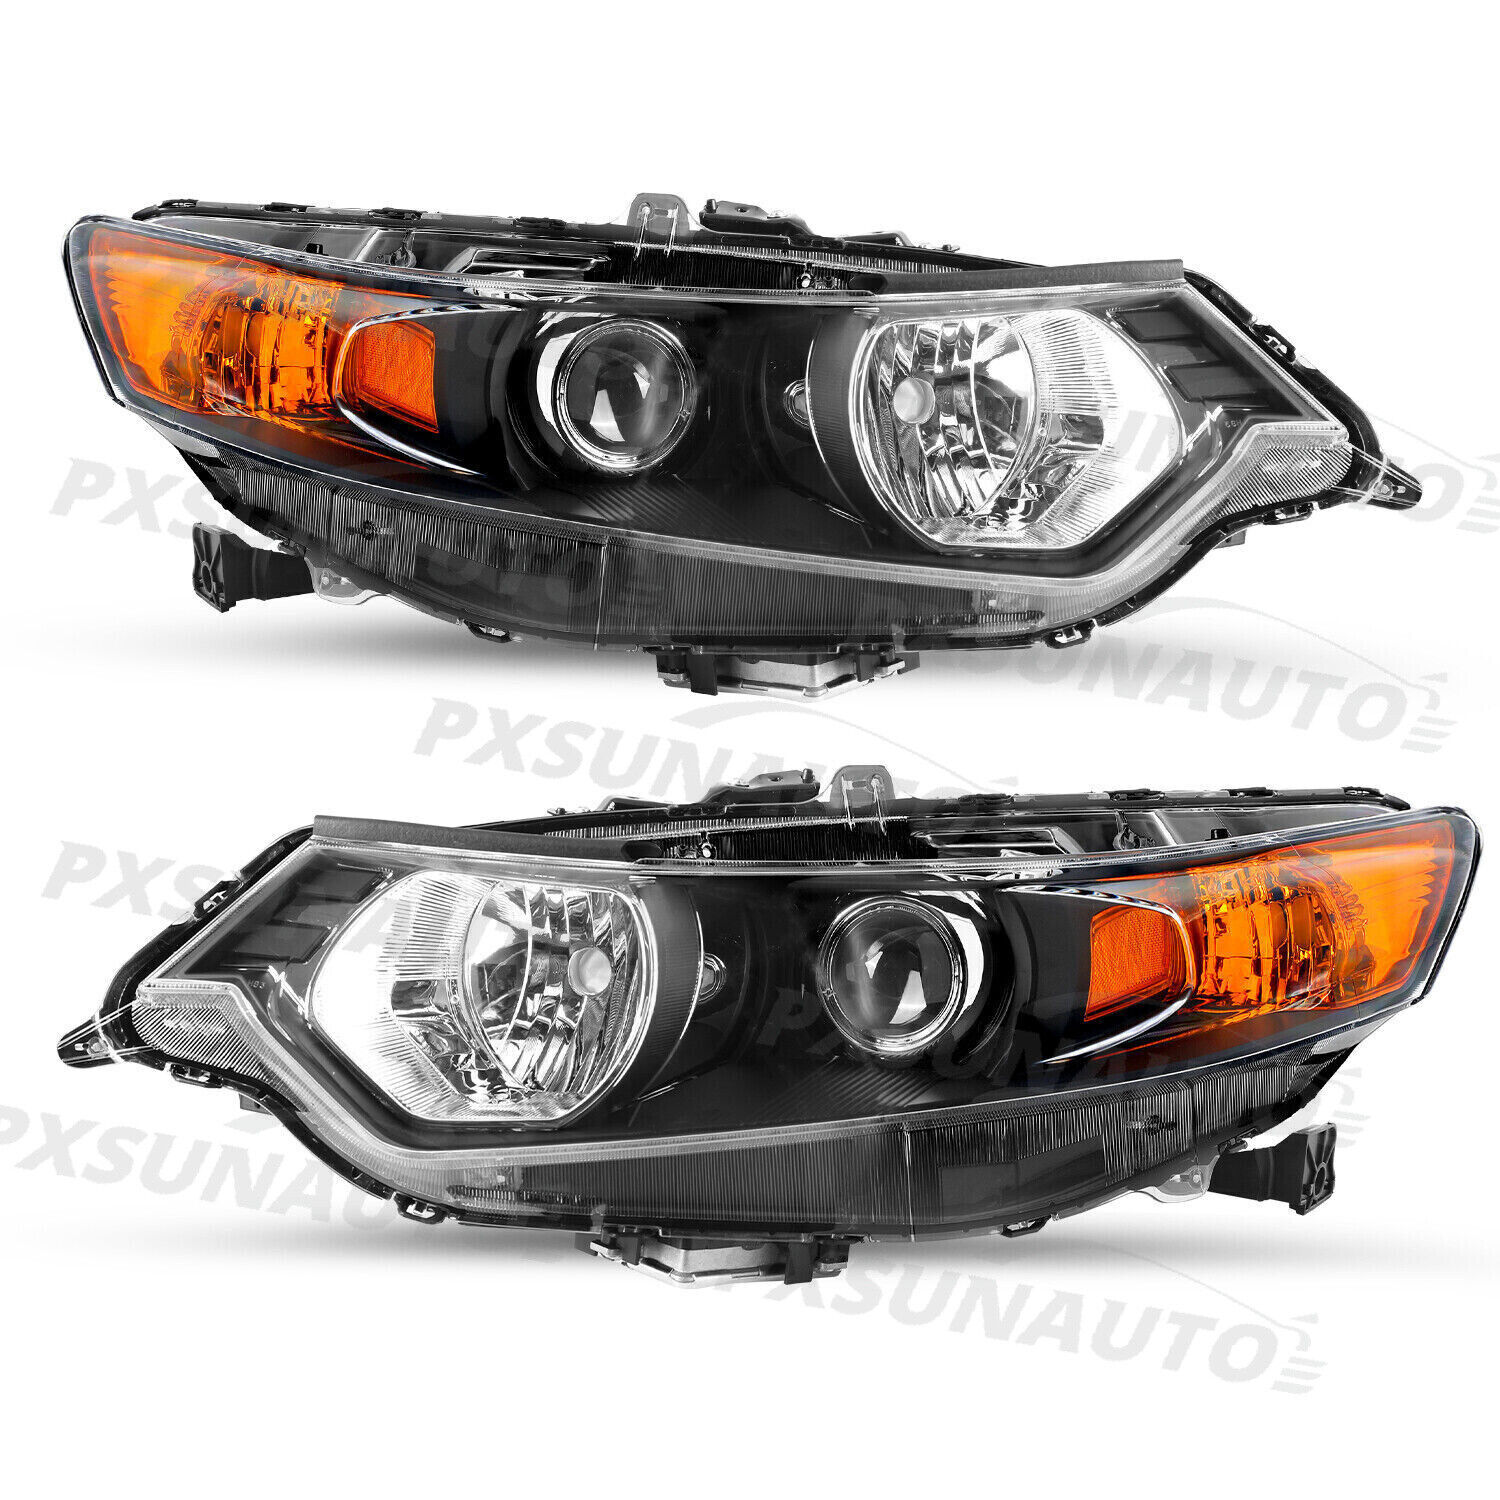 Fit For 2009-2014 Acura TSX OE Style Xenon HID Headlights Assembly Pair